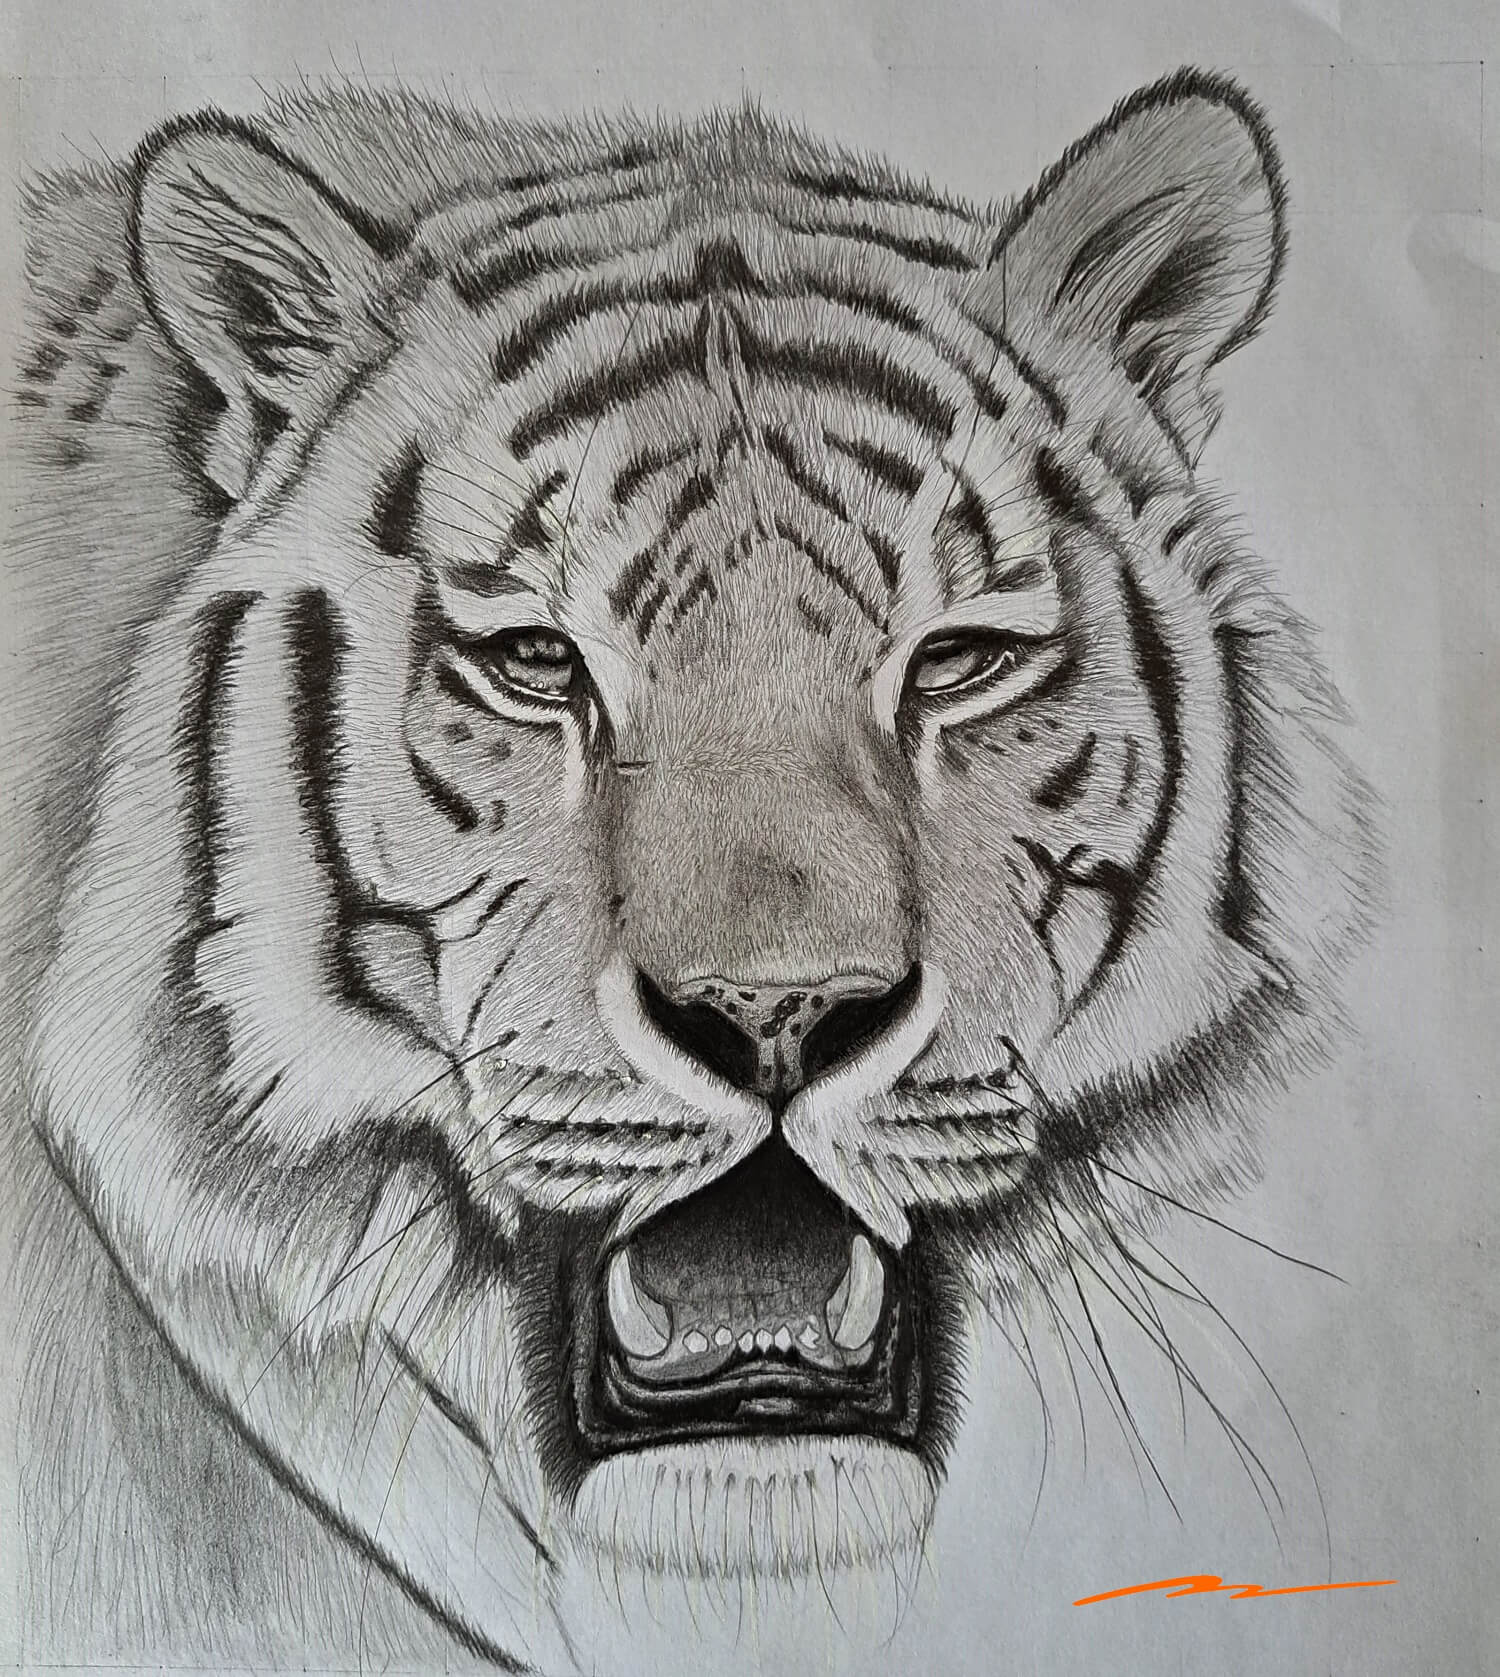 How to Draw a Tiger step by step ॥ Easy Tiger Drawing for Beginner - YouTube